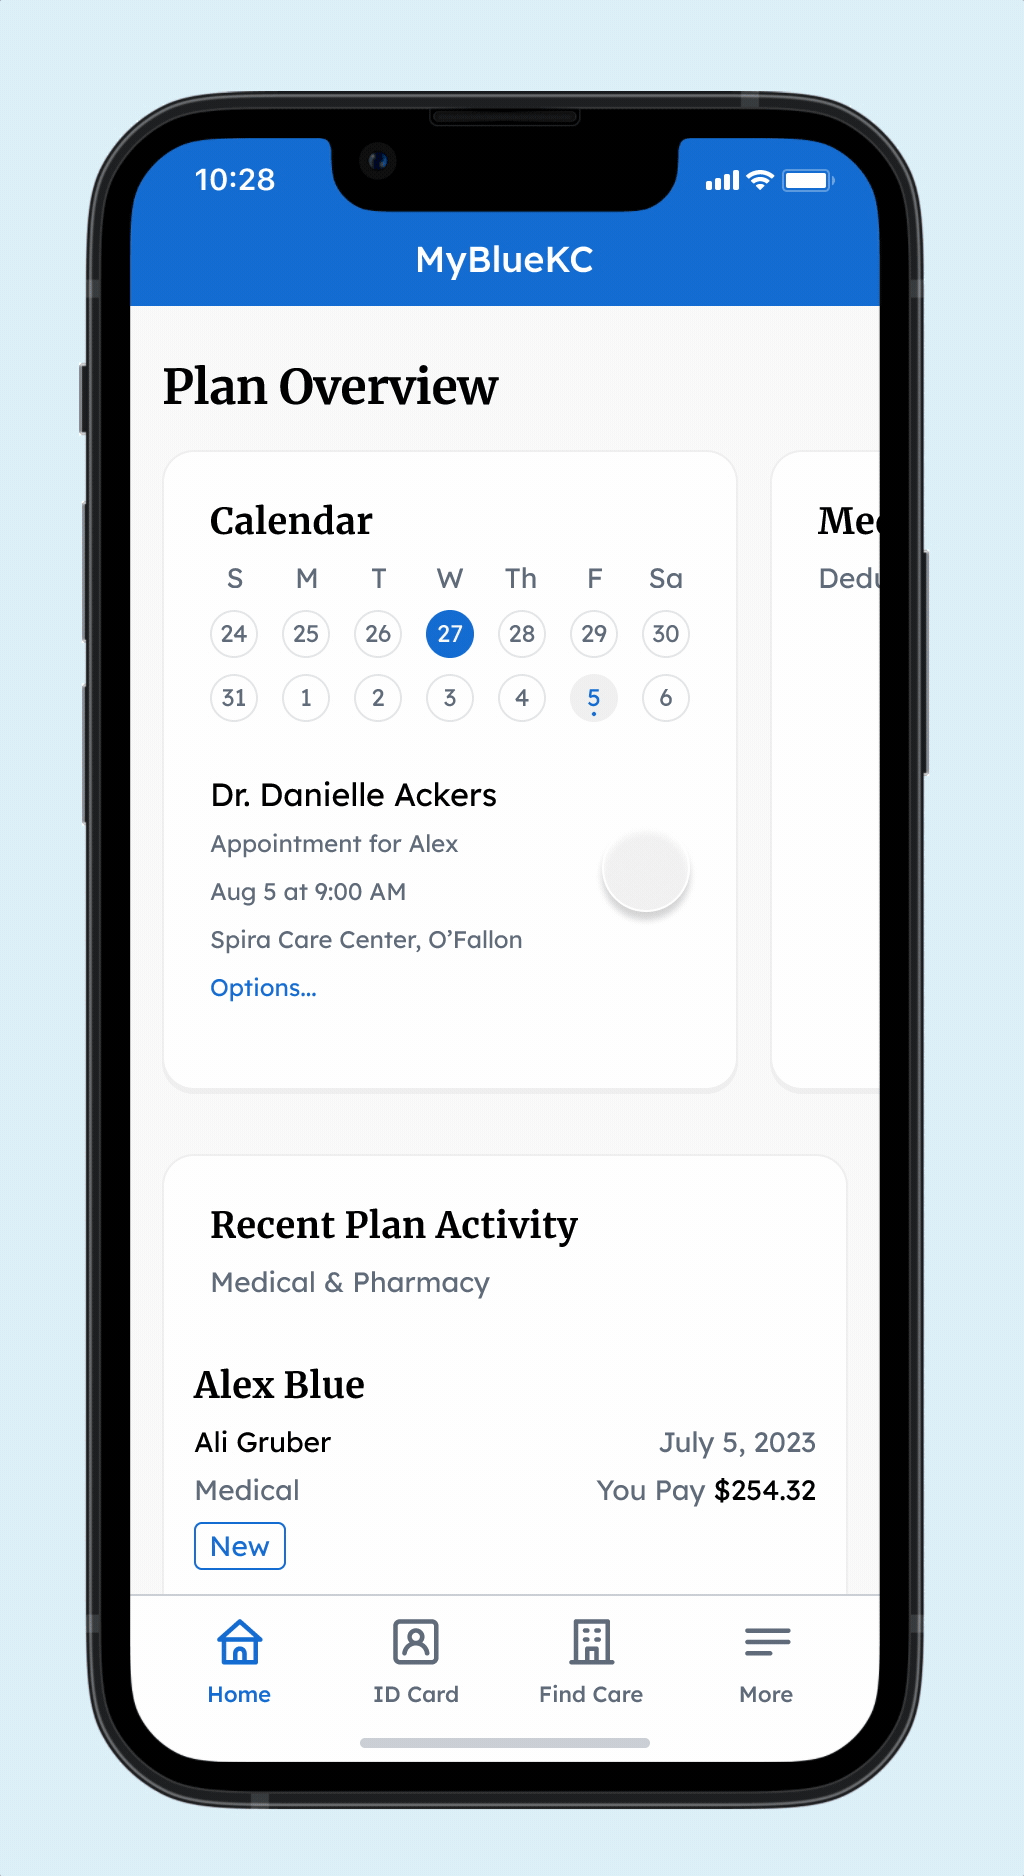 Design concept for a mobile health insurance app with a data-driven dashboard. Product design concept by Sean Berger.